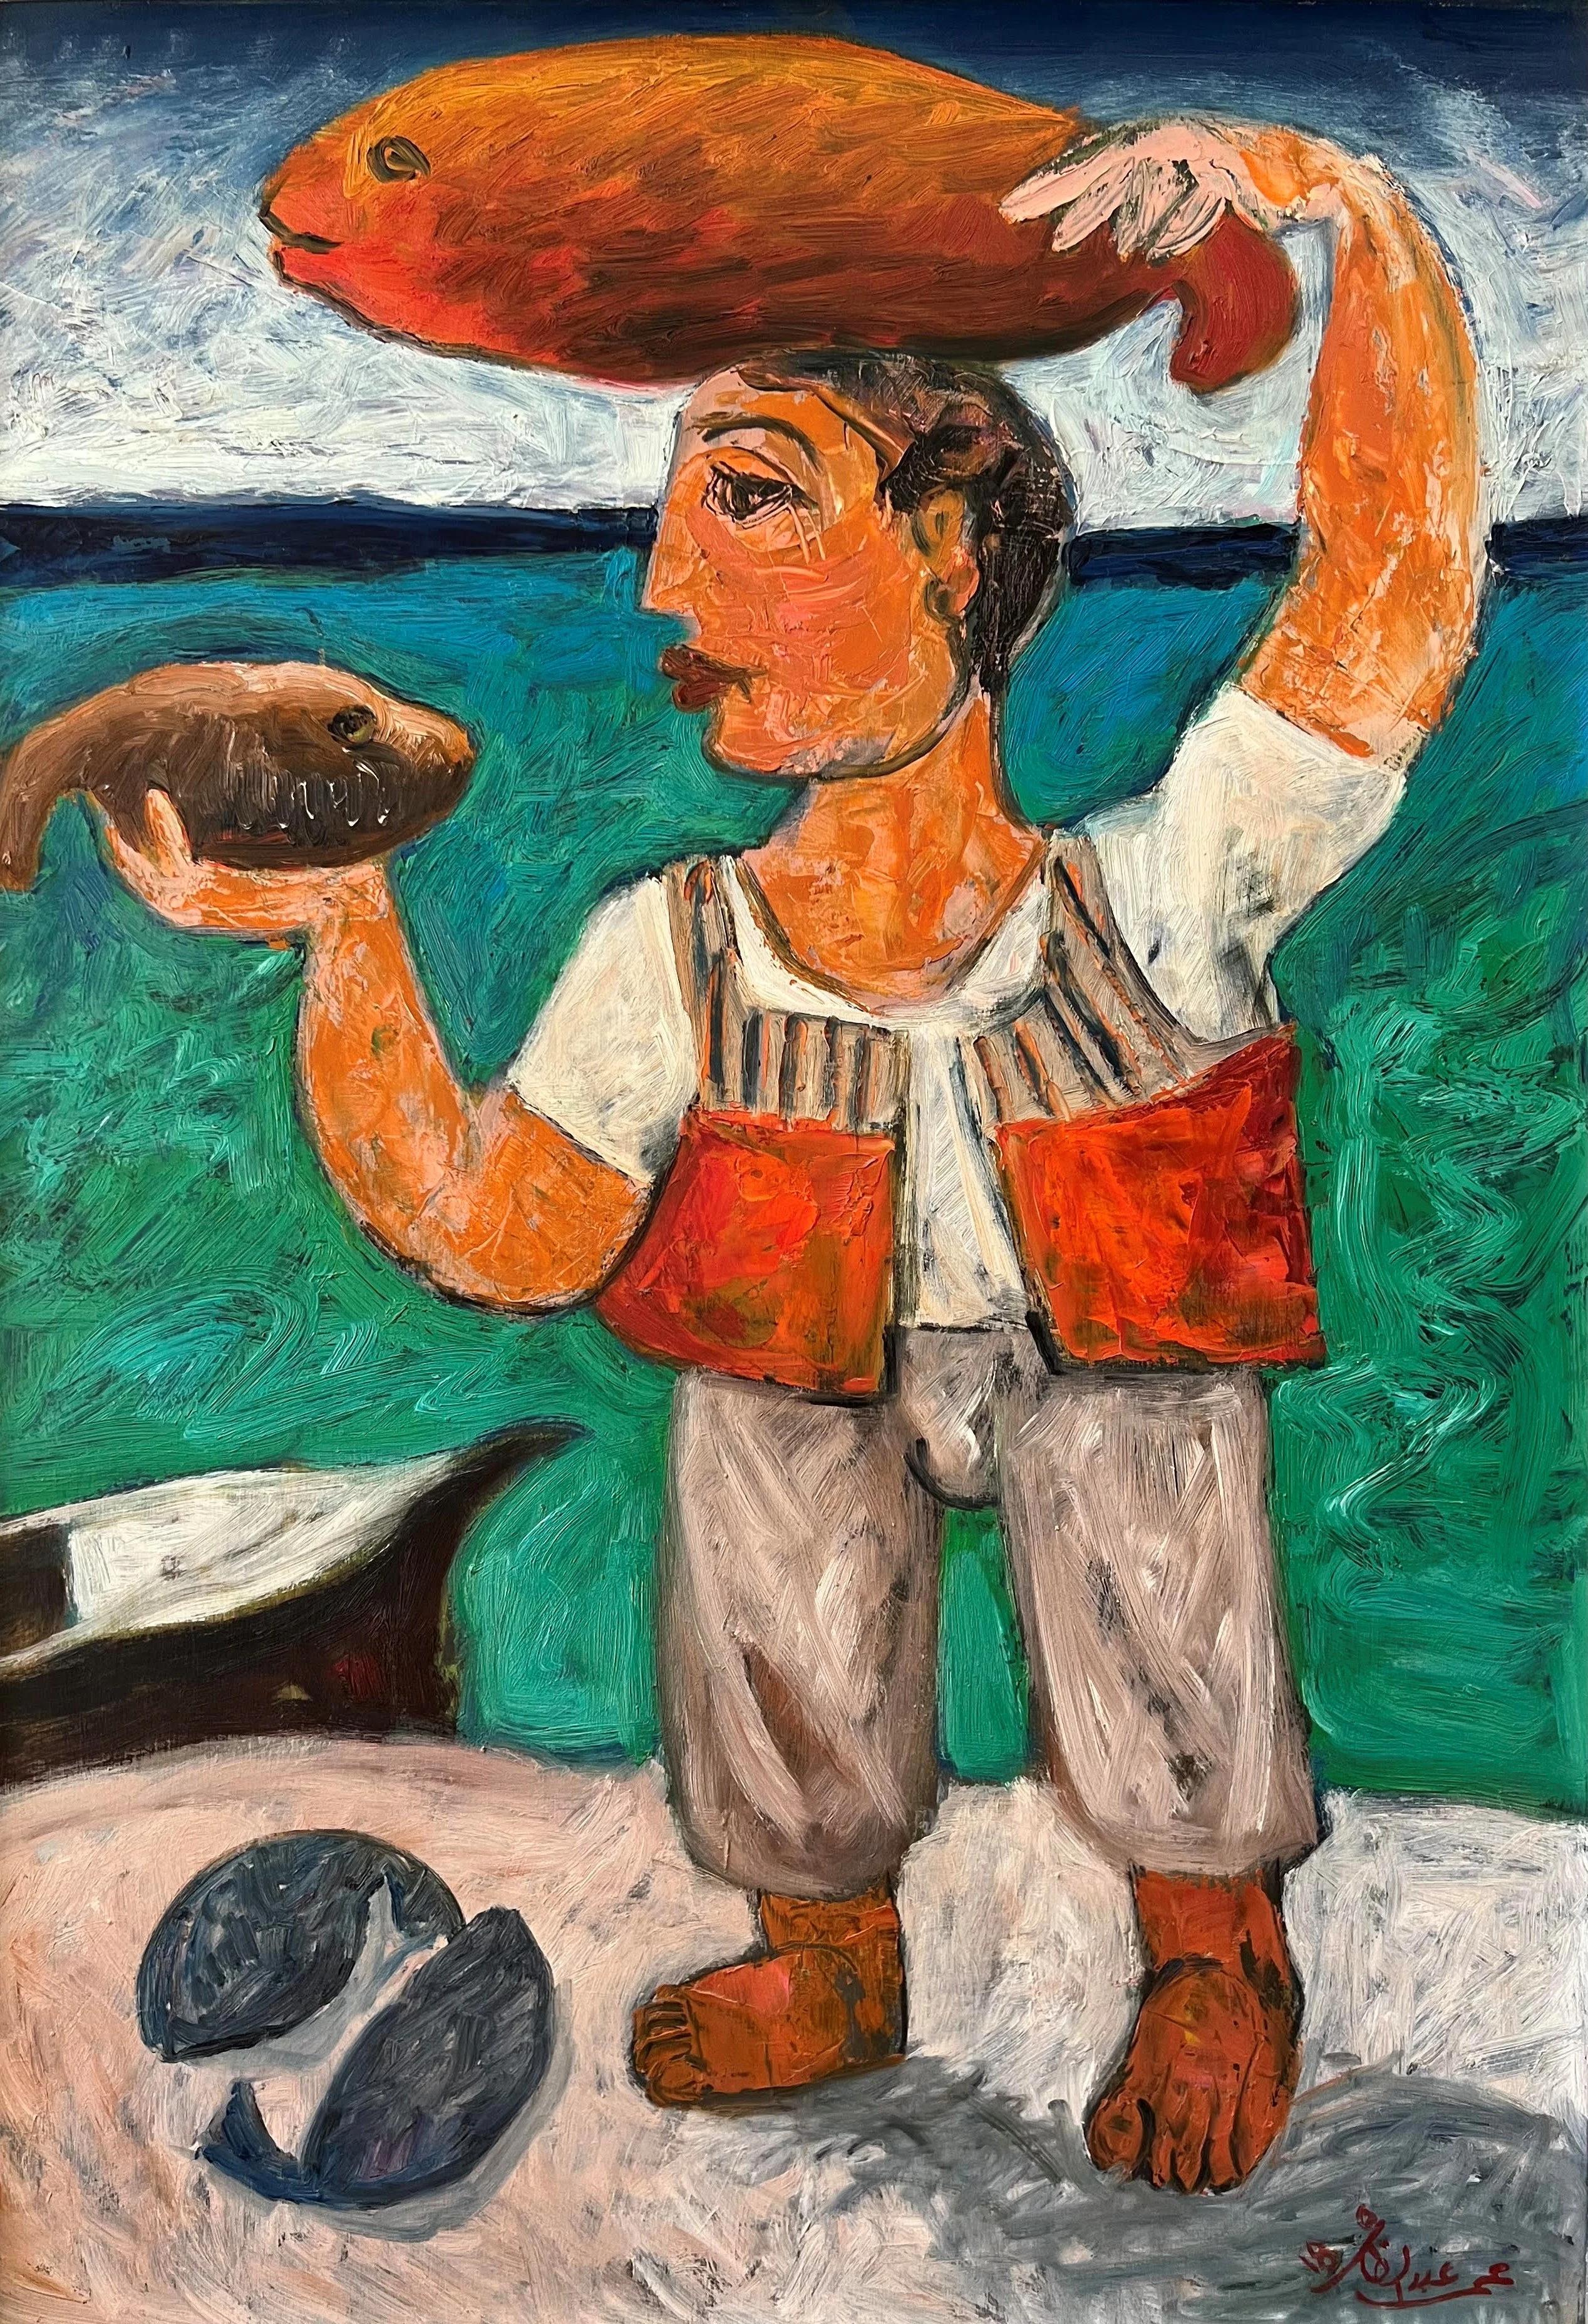 "Fisherman" Oil painting 27.5" x 19" inch by Omar Abdel Zaher